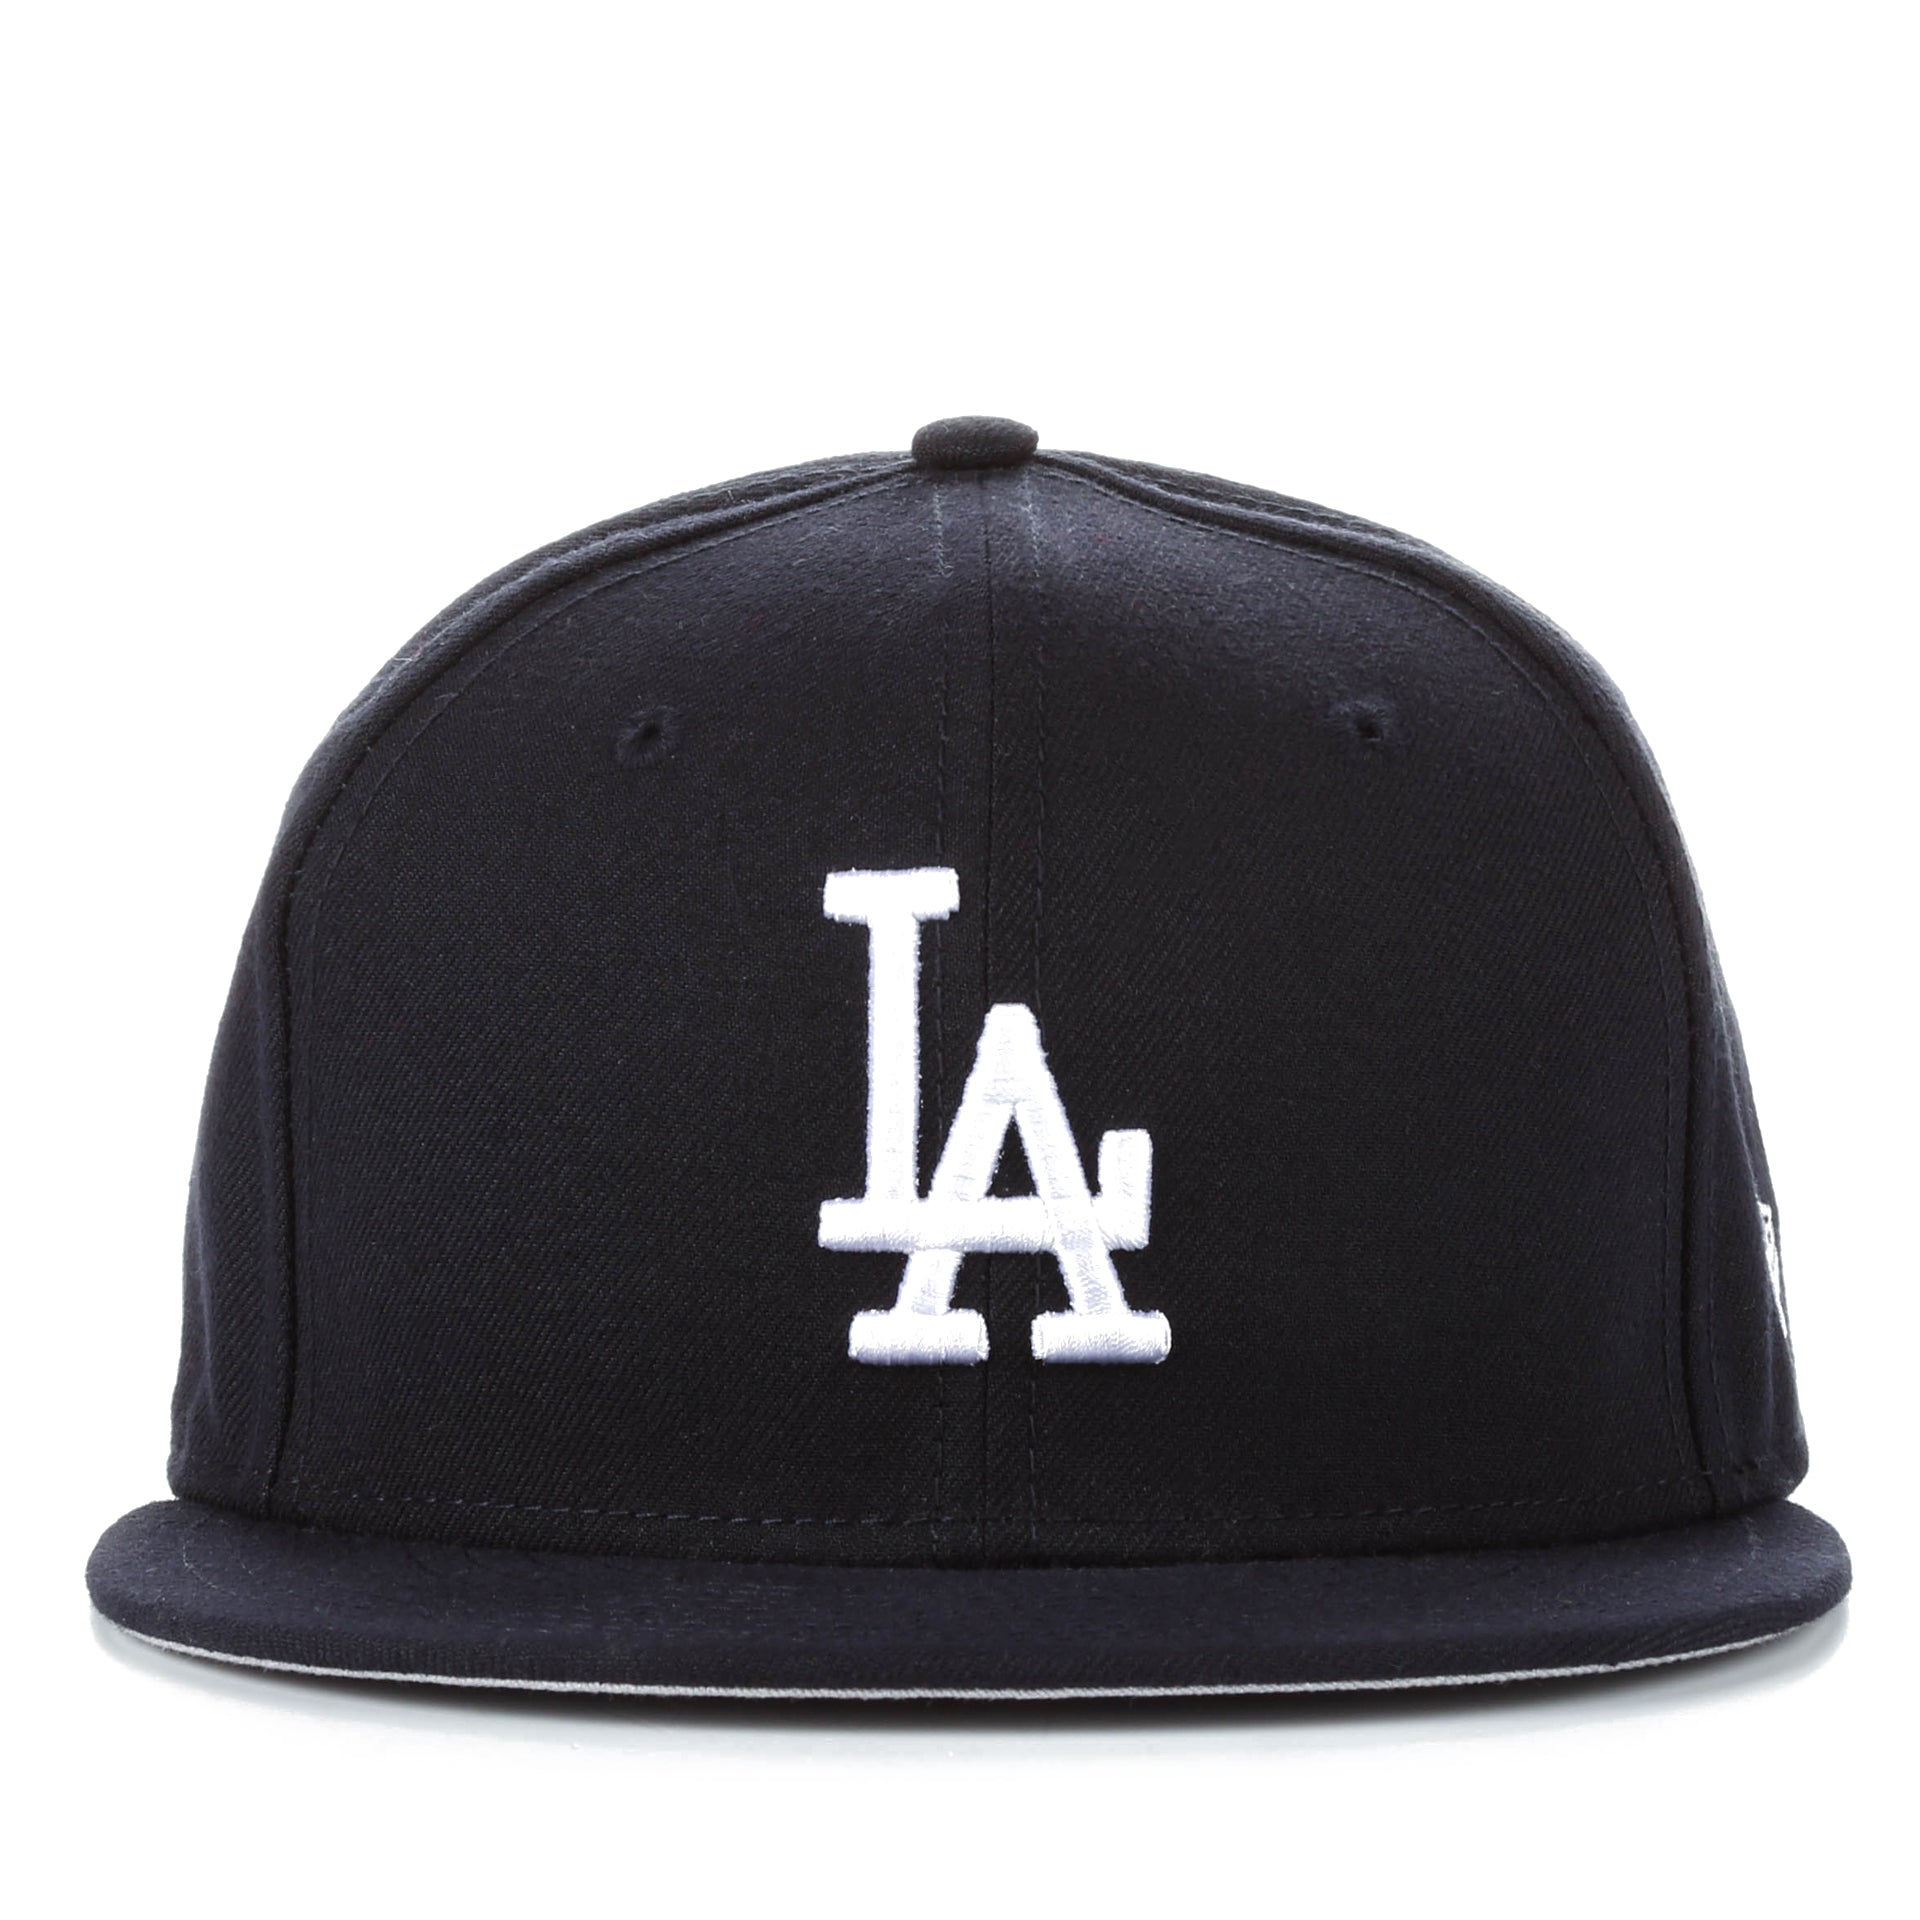 New Era 59Fifty MLB Basic Fitted Cap - Los Angeles Dodgers/Navy